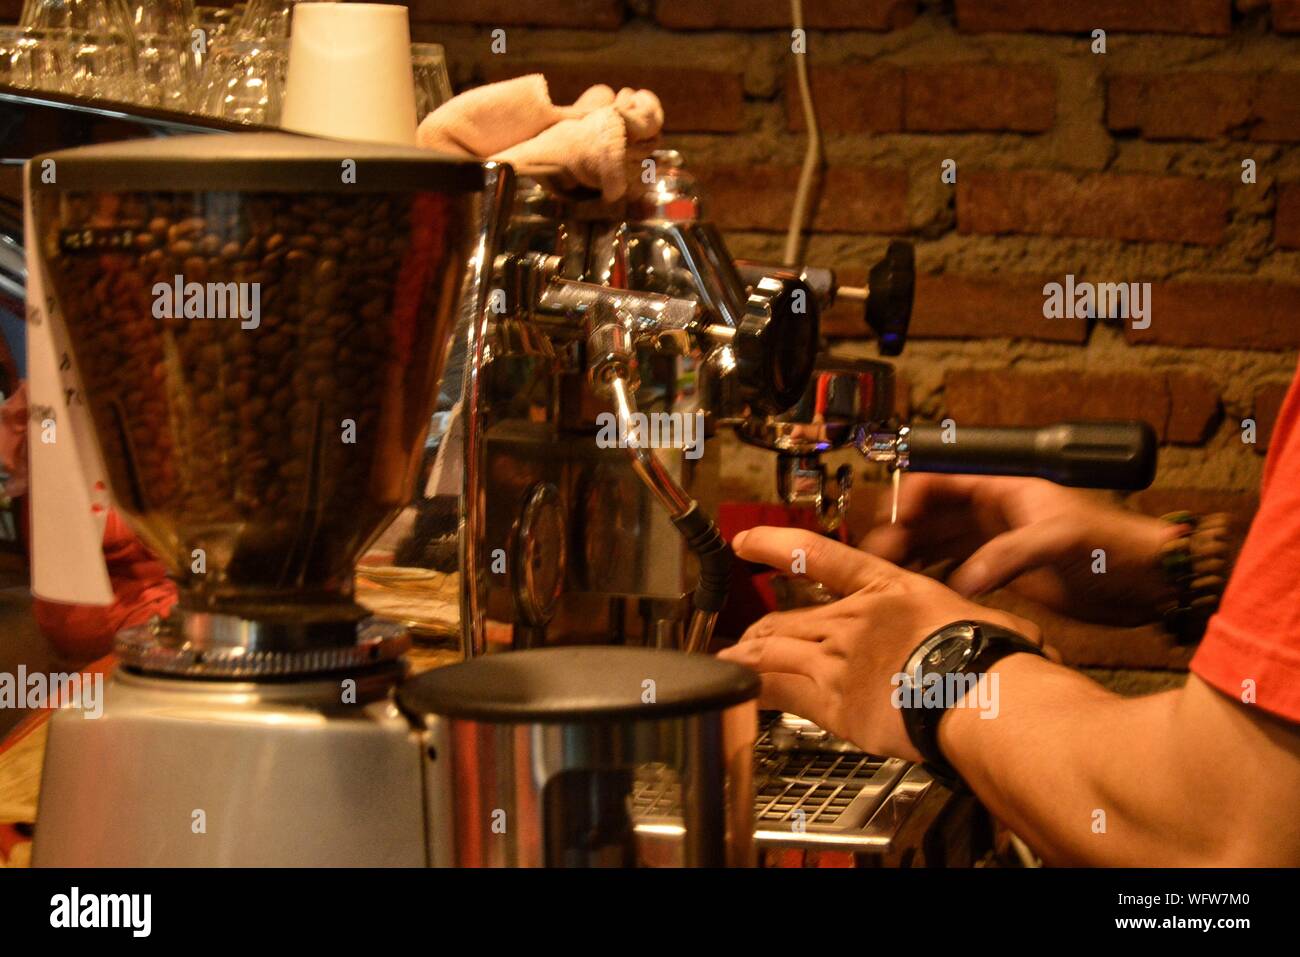 Cropped Hands Of Man Working In Cafe Stock Photo